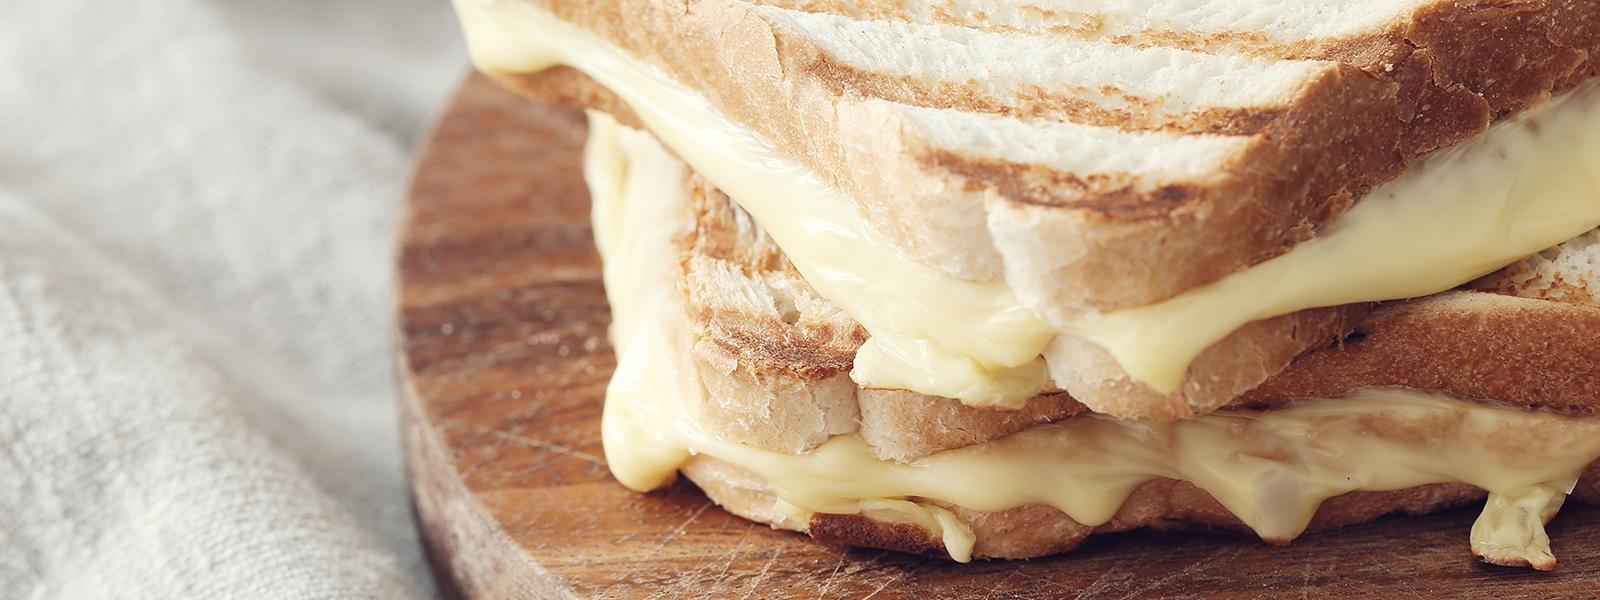 grilled sandwich with edam cheese